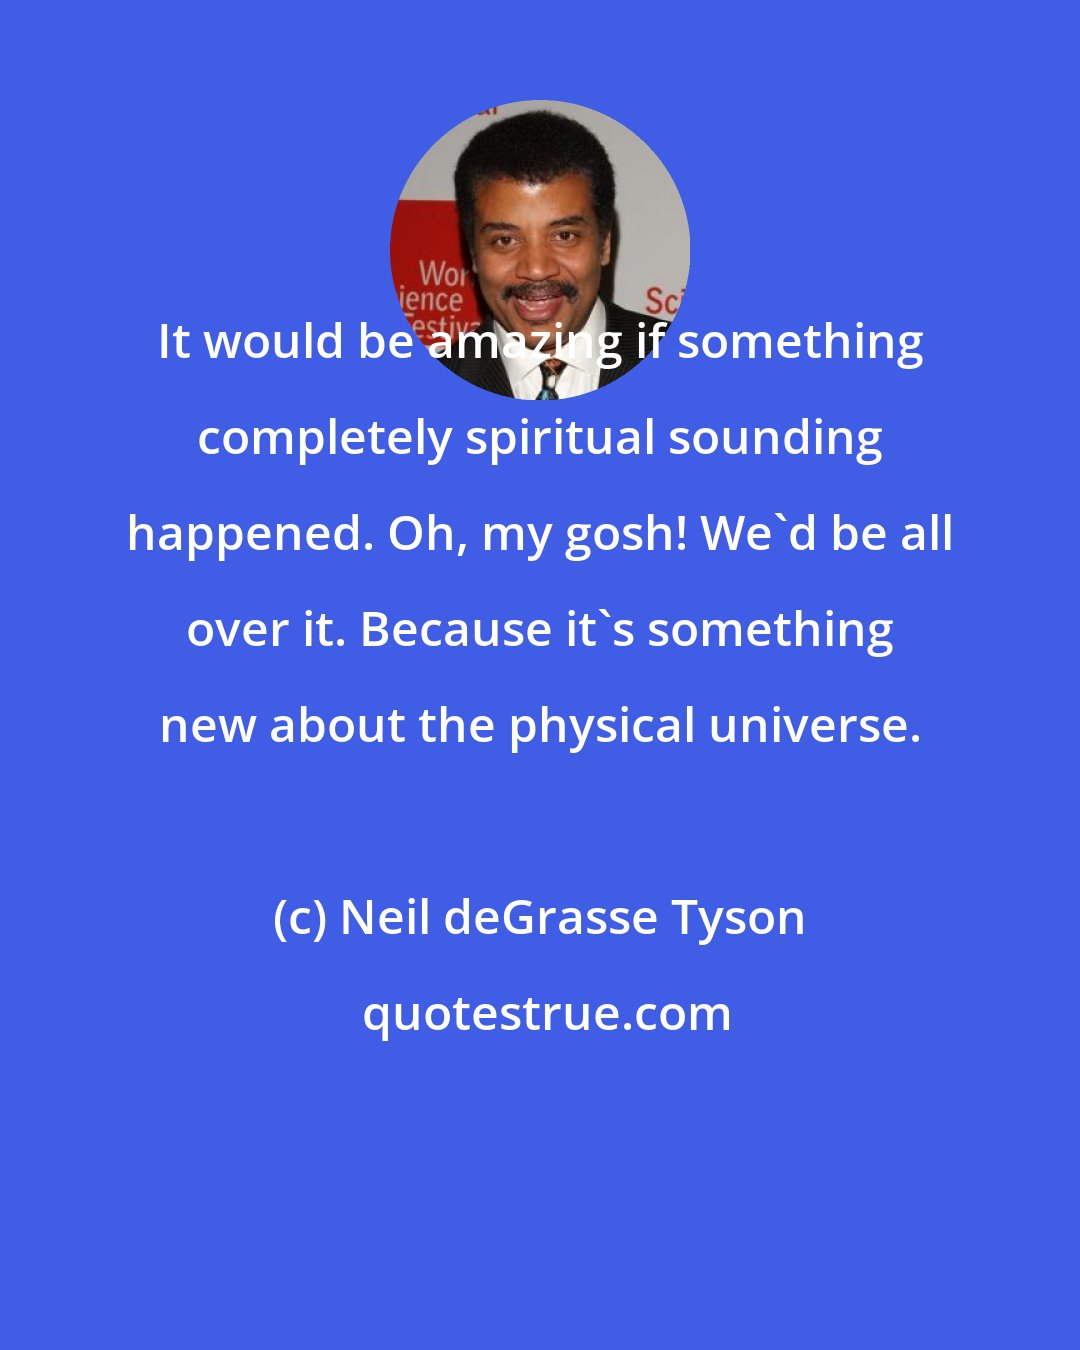 Neil deGrasse Tyson: It would be amazing if something completely spiritual sounding happened. Oh, my gosh! We'd be all over it. Because it's something new about the physical universe.